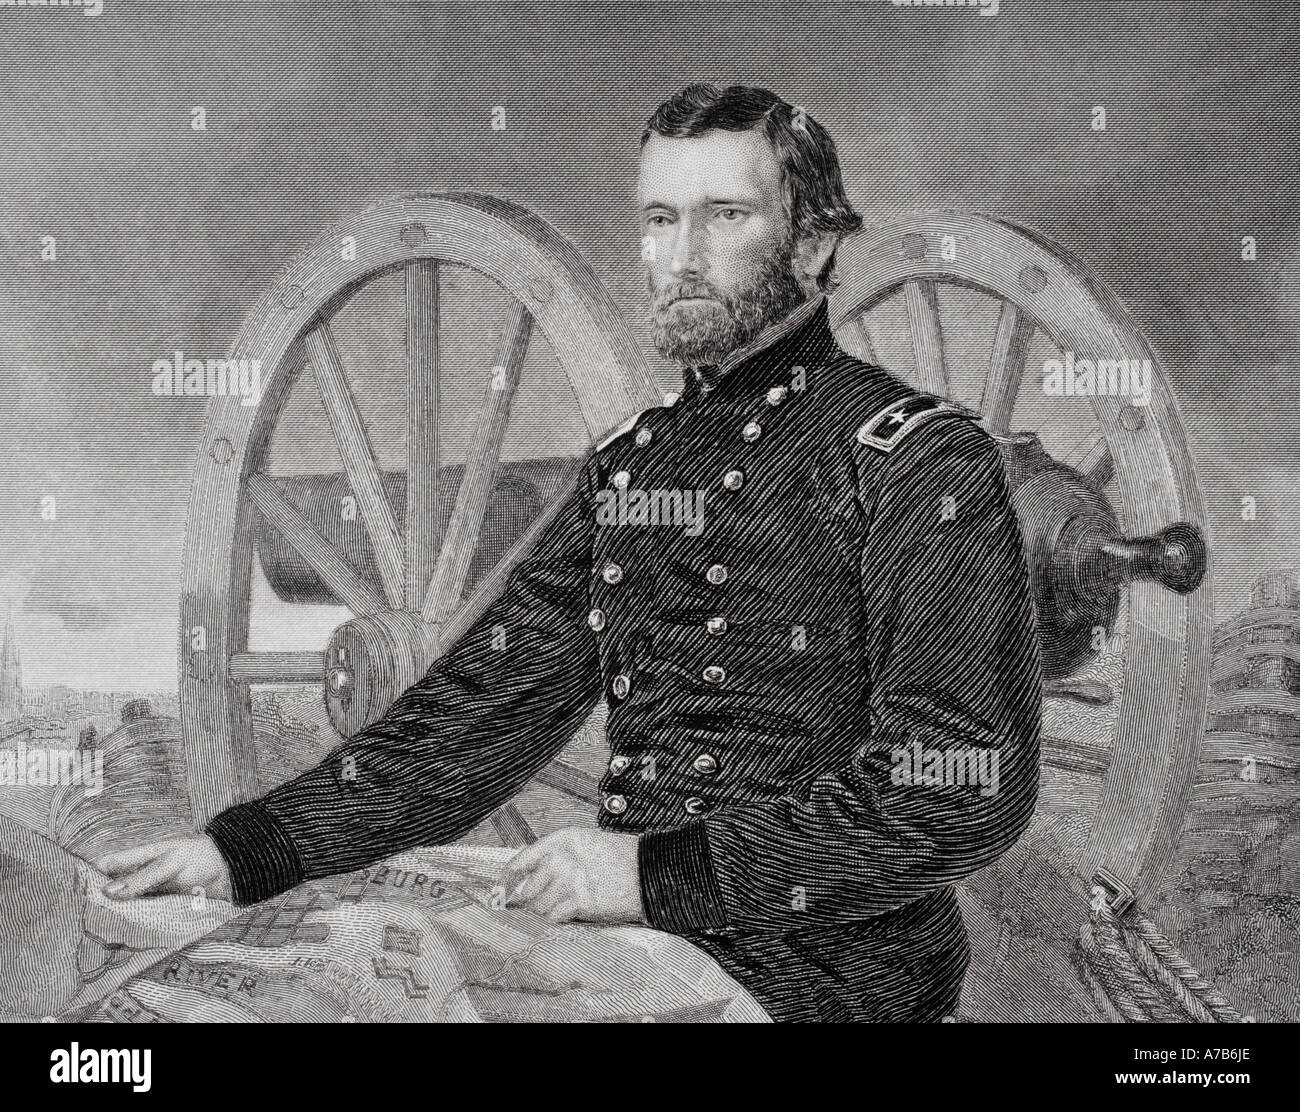 Ulysses S Grant, 1822 - 1885.  Commander of the Union armies in the American Civil War and 18th President of the United States of America. Stock Photo